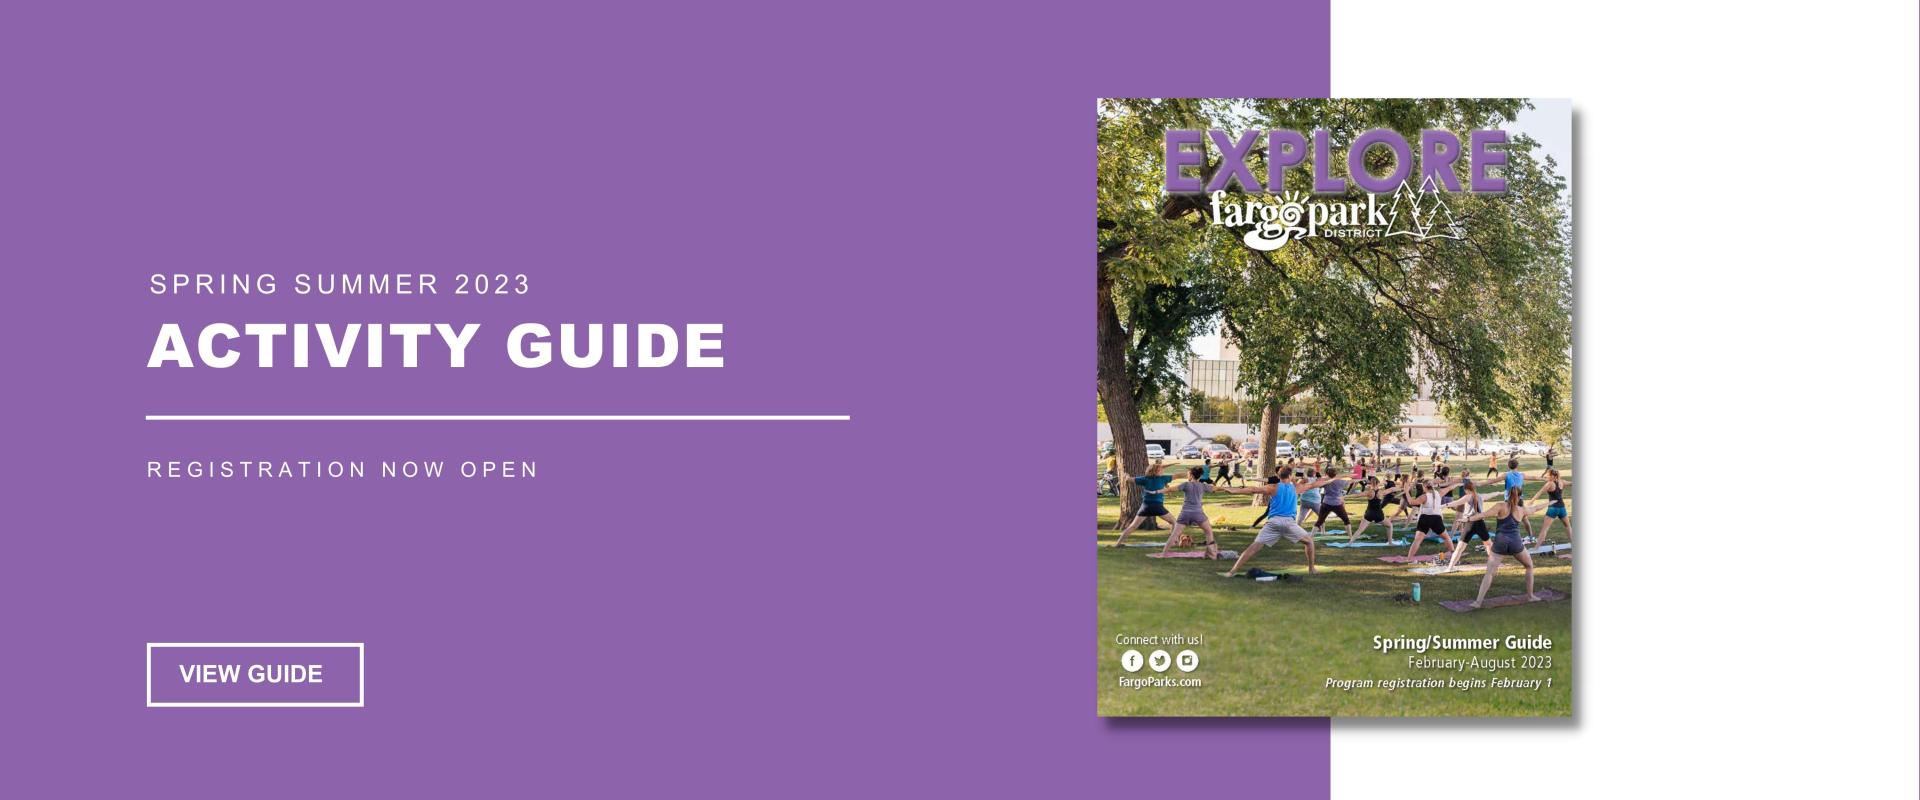 Spring Summer 2023 ACTIVITY GUIDE Registration Now Open with View Guide Button of left side of image with purple background and white text and image of the Fargo Park District 2023 Spring Summer Activity Guide on left side of the page which is a picture of adults doing yoga in Island Park 